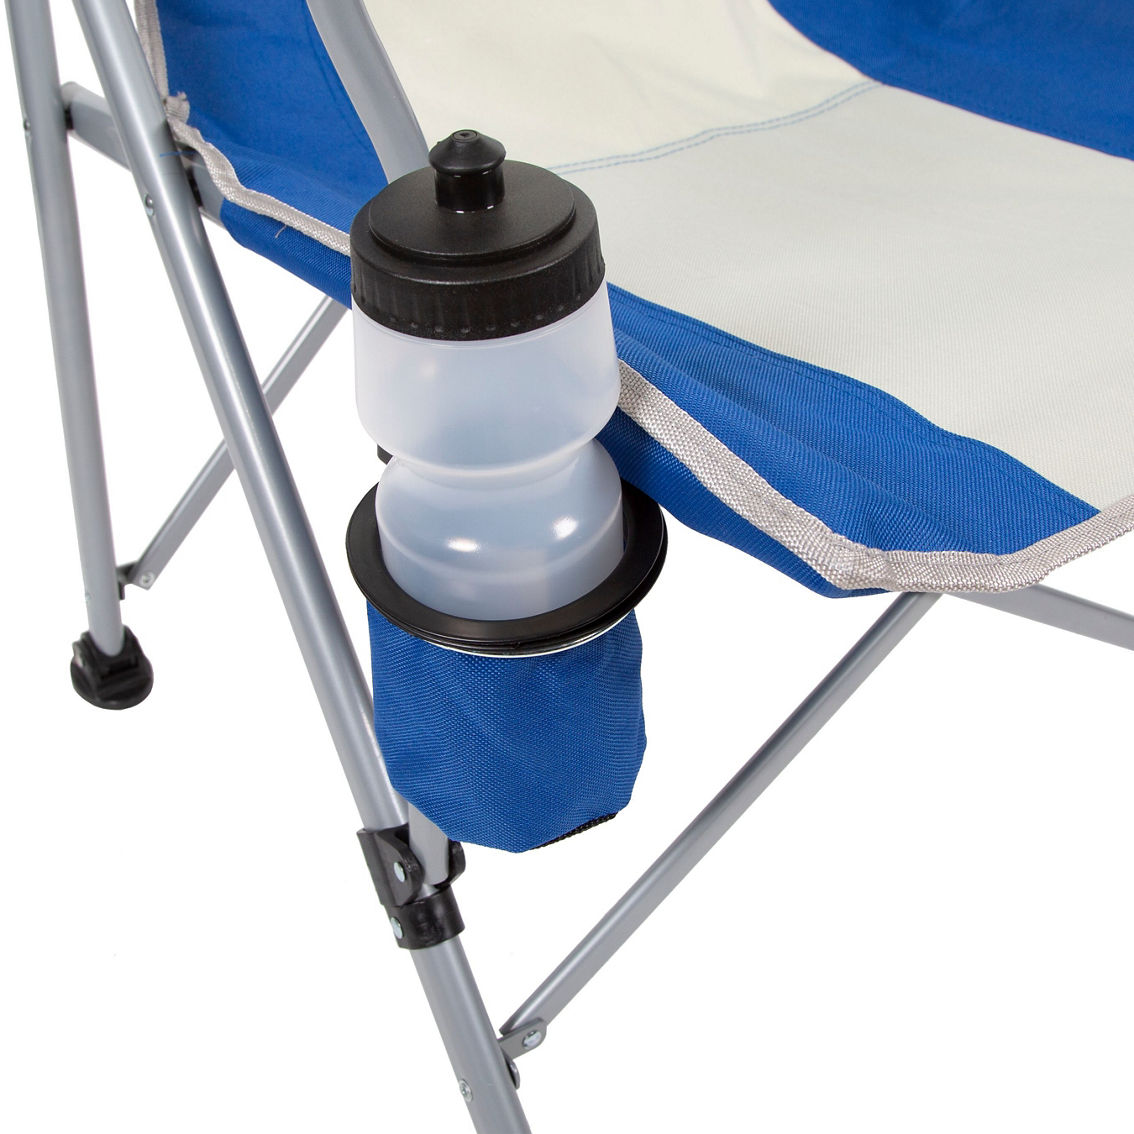 Stansport Mesa Camp Chair - Blue/Grey - Image 3 of 5